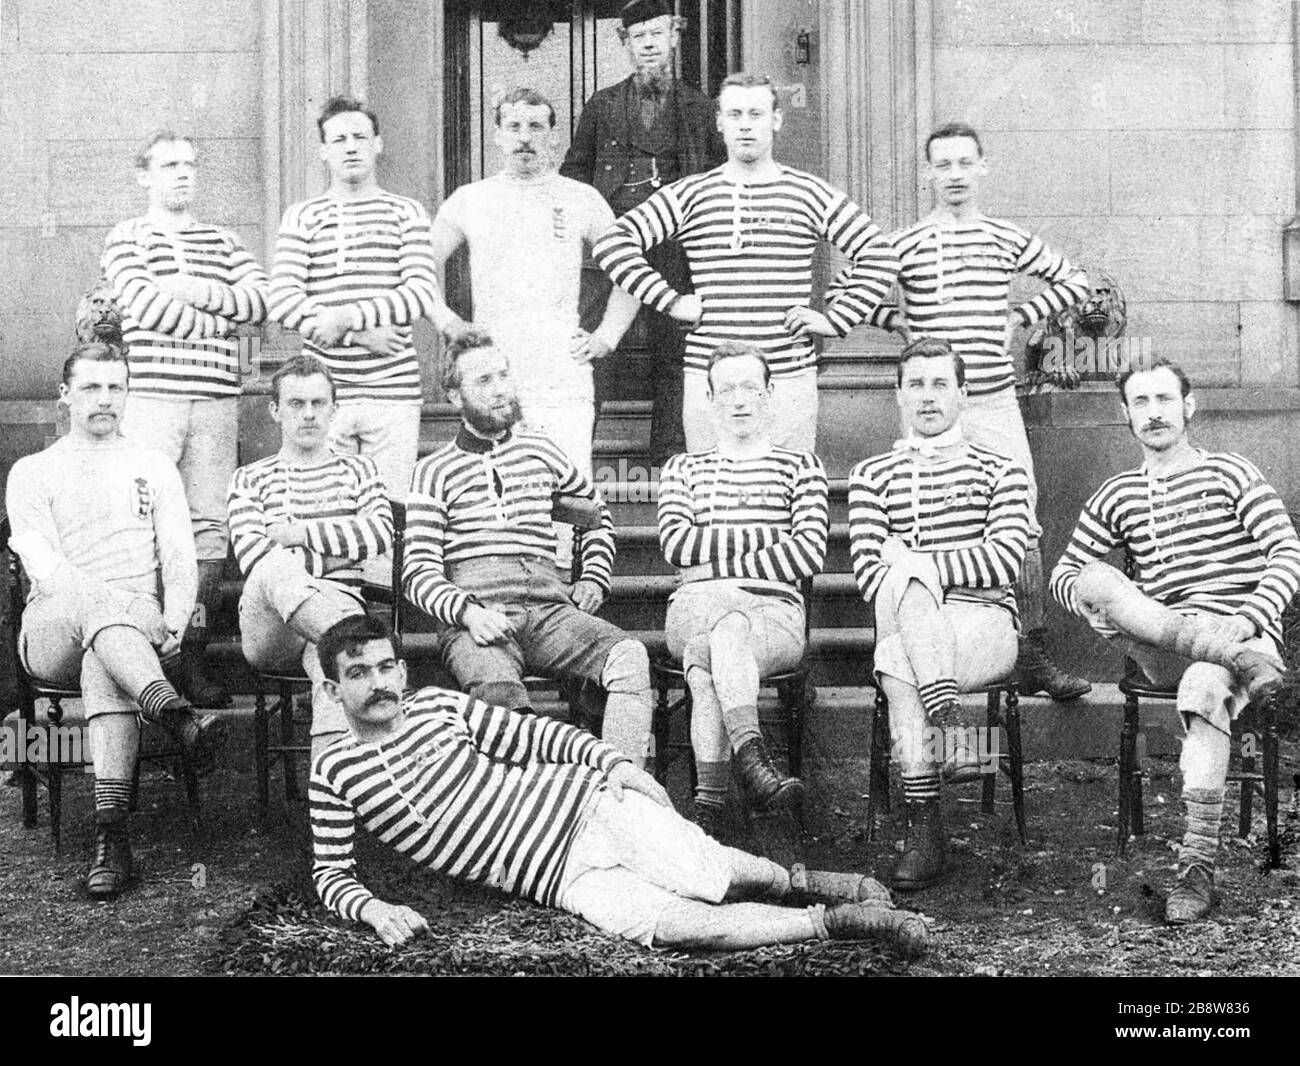 DARWEN FC 1879-1880. From Lancashire they reached the semi-finals of the FA Cup in the 1880-1881 season. The professional player Fergie Suter lies in font. Stock Photo